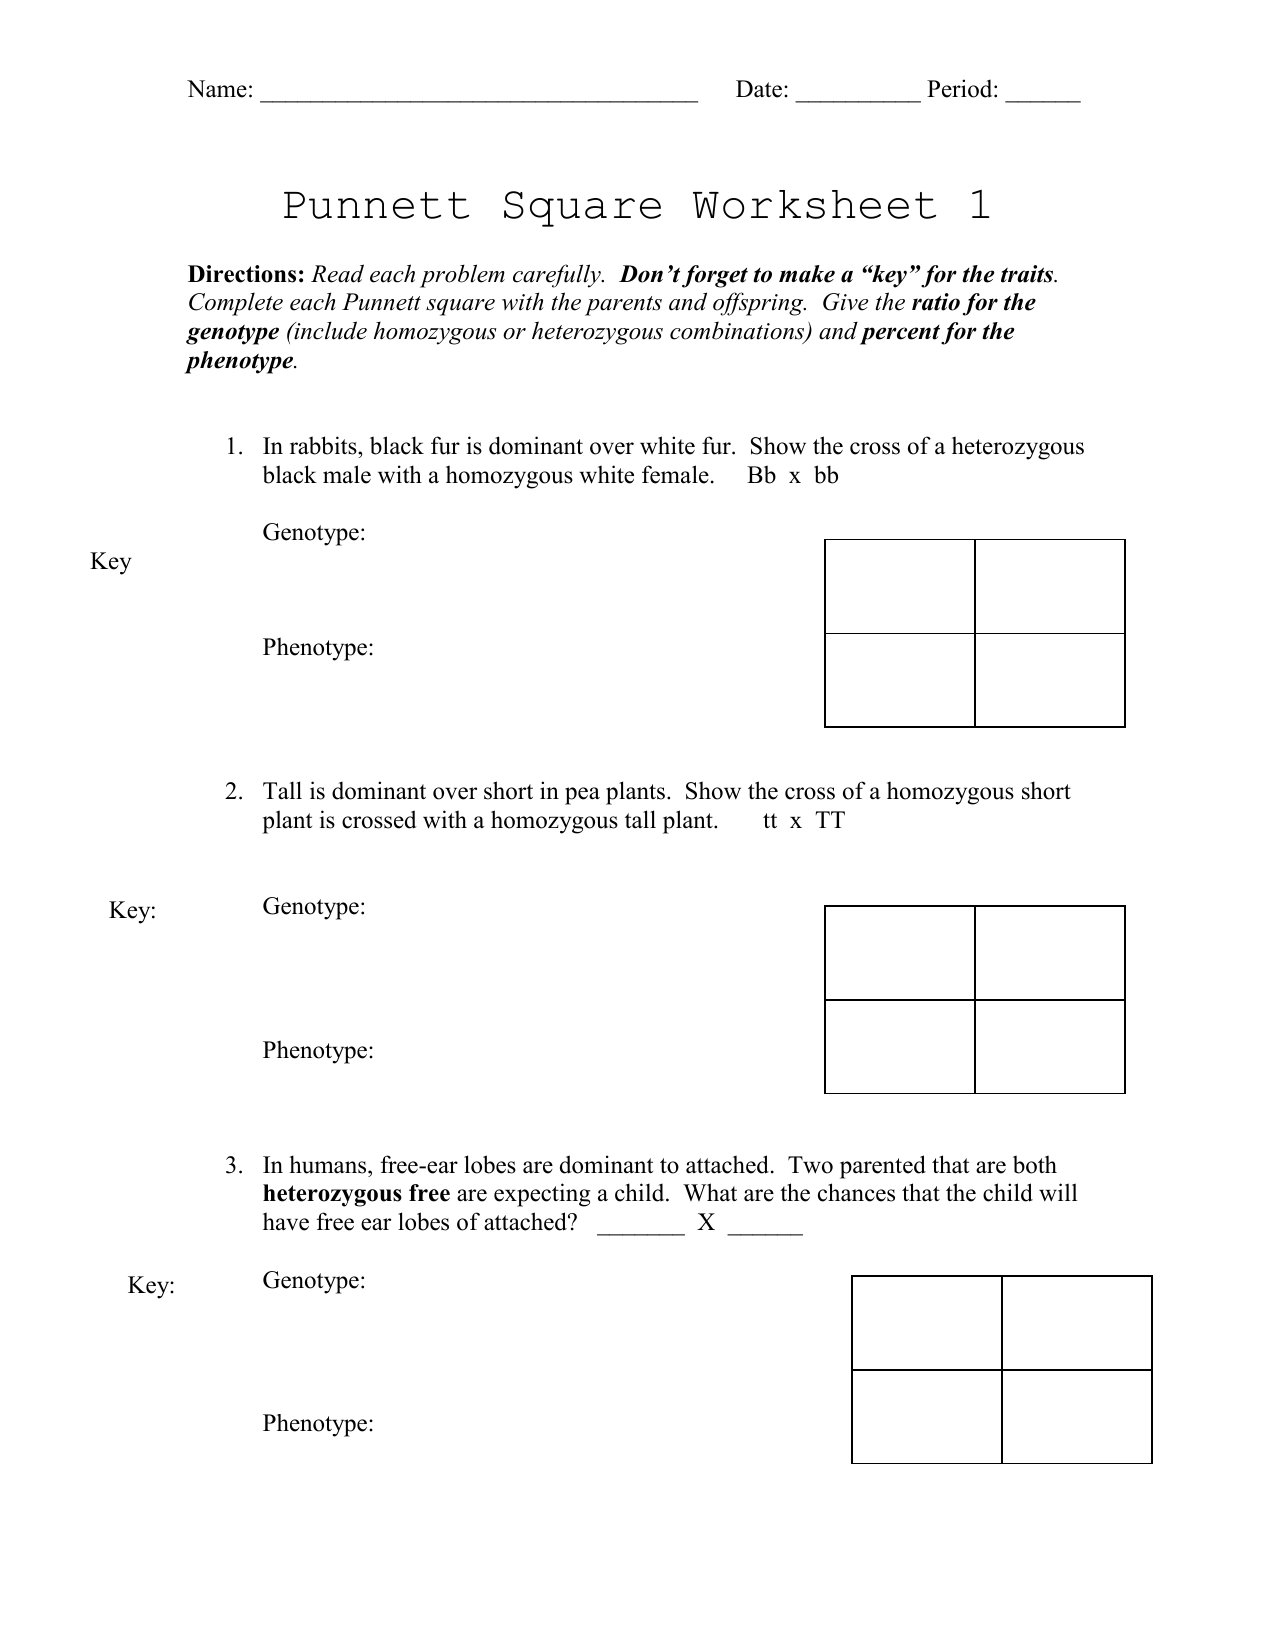 punnett-square-worksheet-with-answers